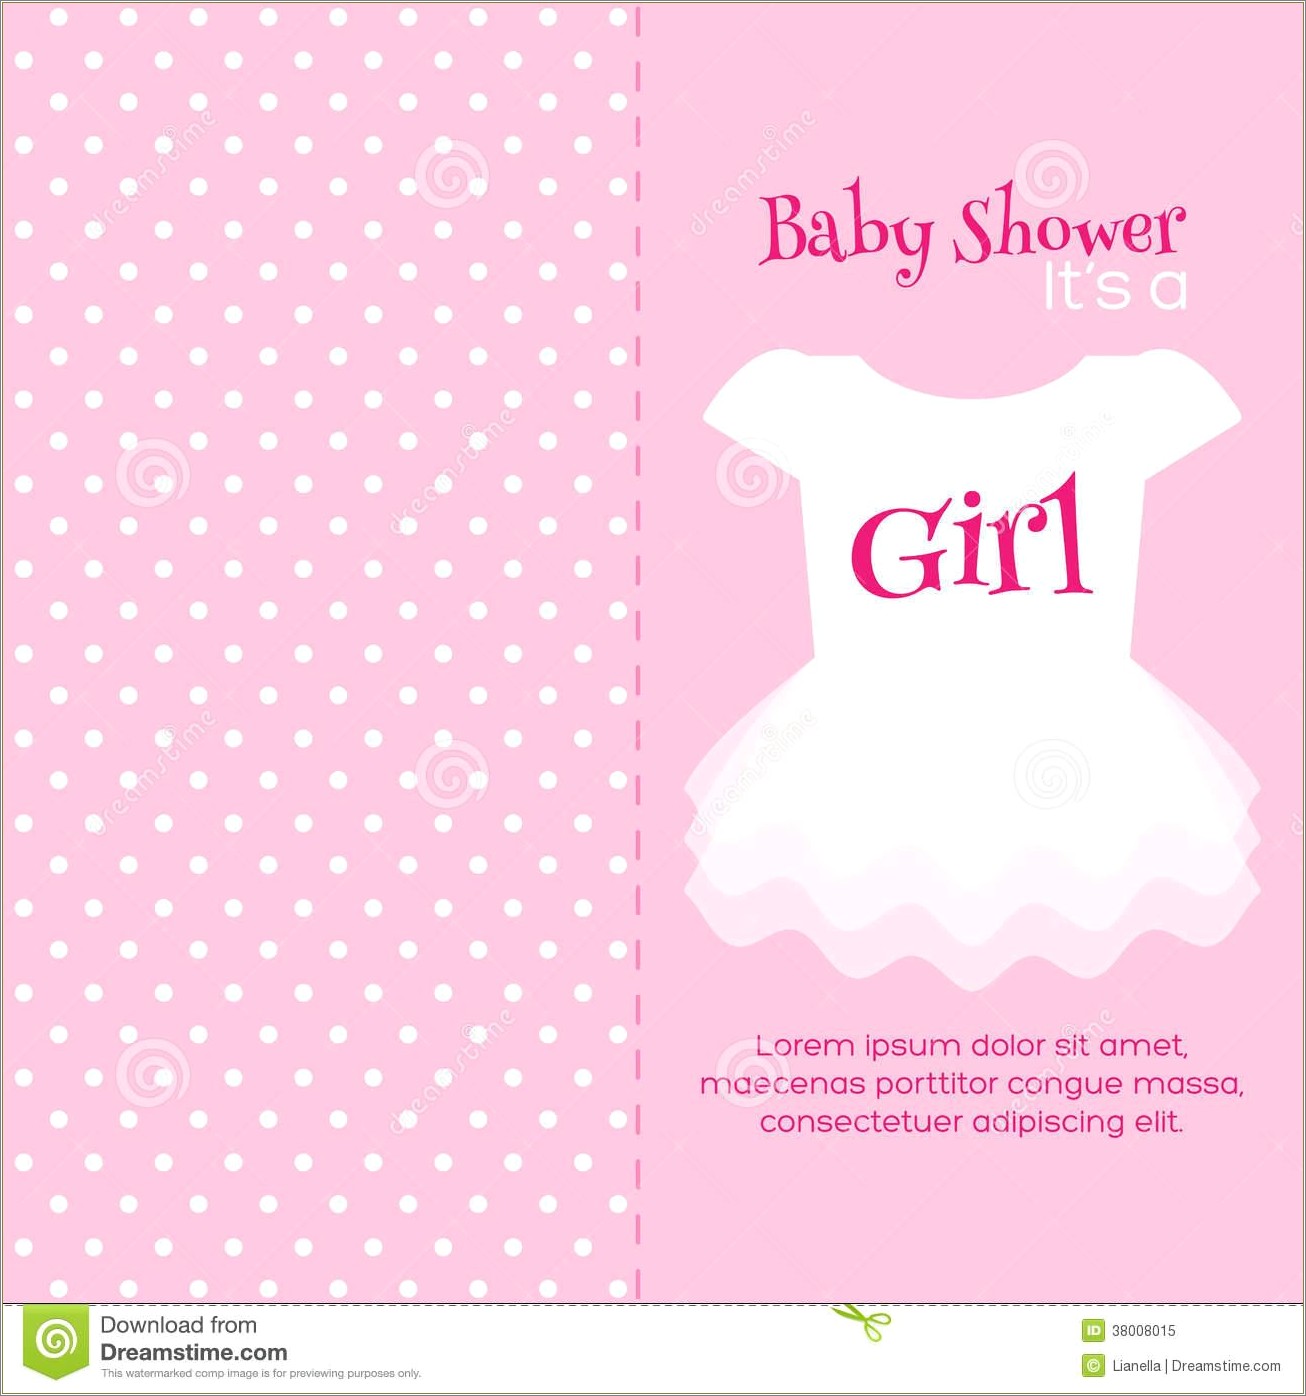 Free Powerpoint Baby Shower Invitation Templates